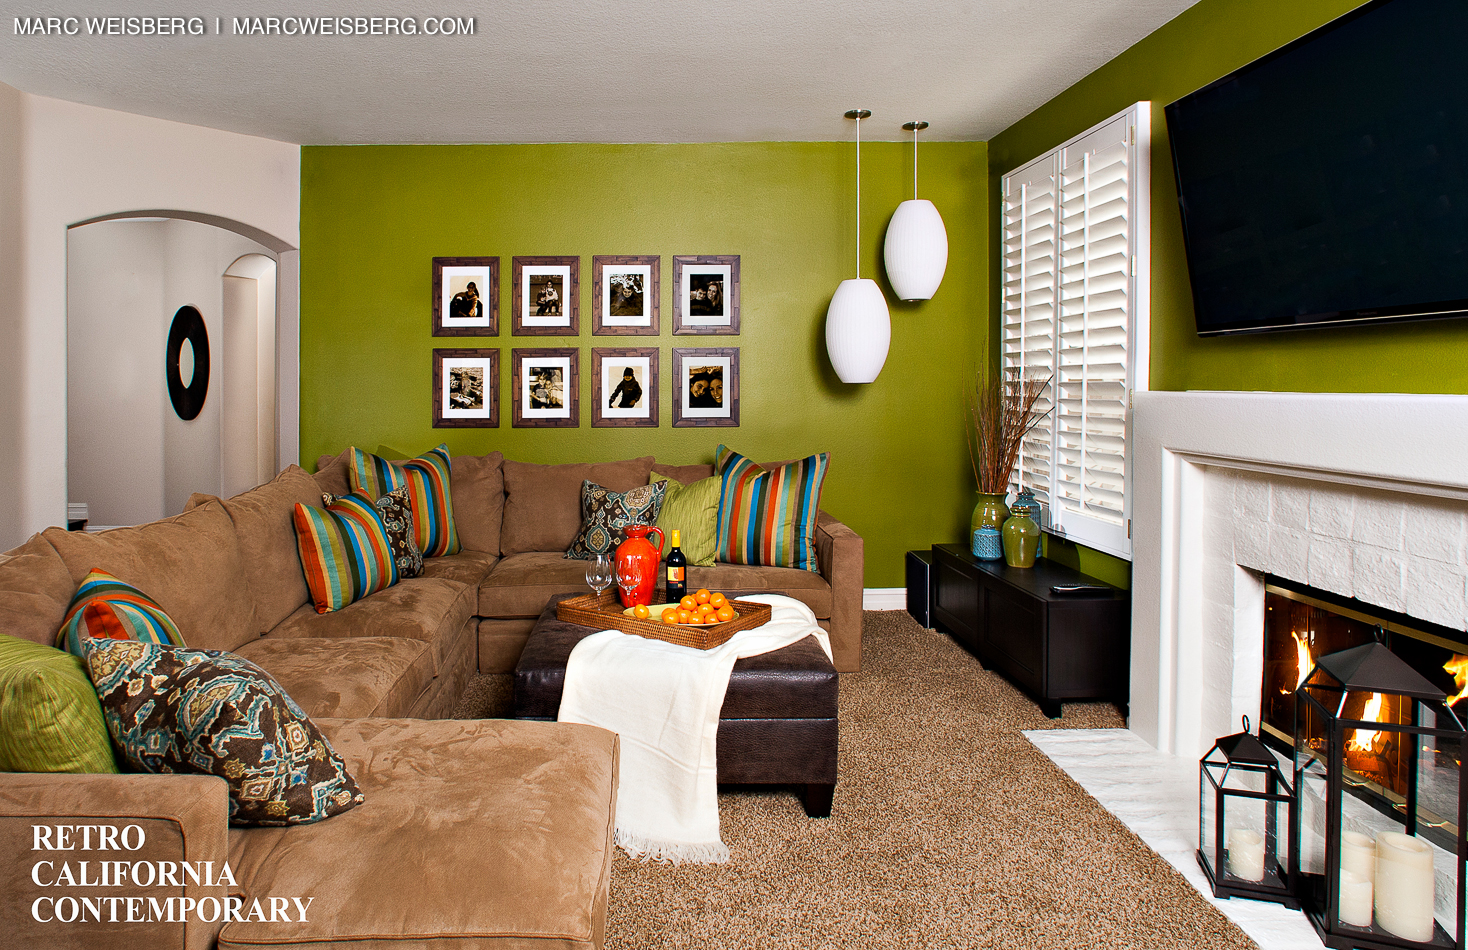 orange county real estate photographer pictures